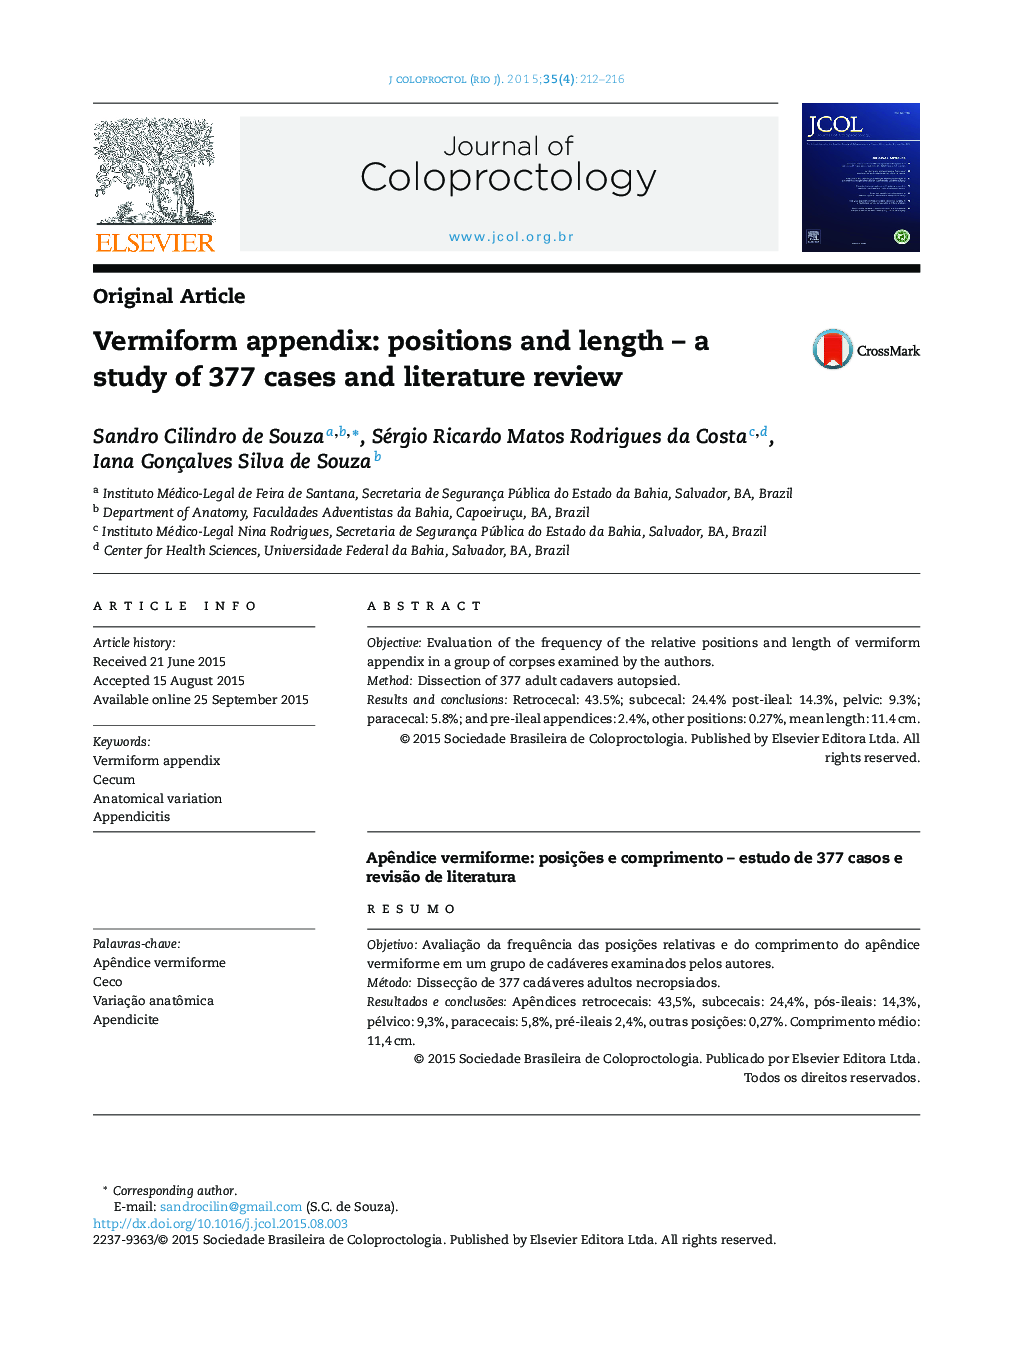 Vermiform appendix: positions and length – a study of 377 cases and literature review